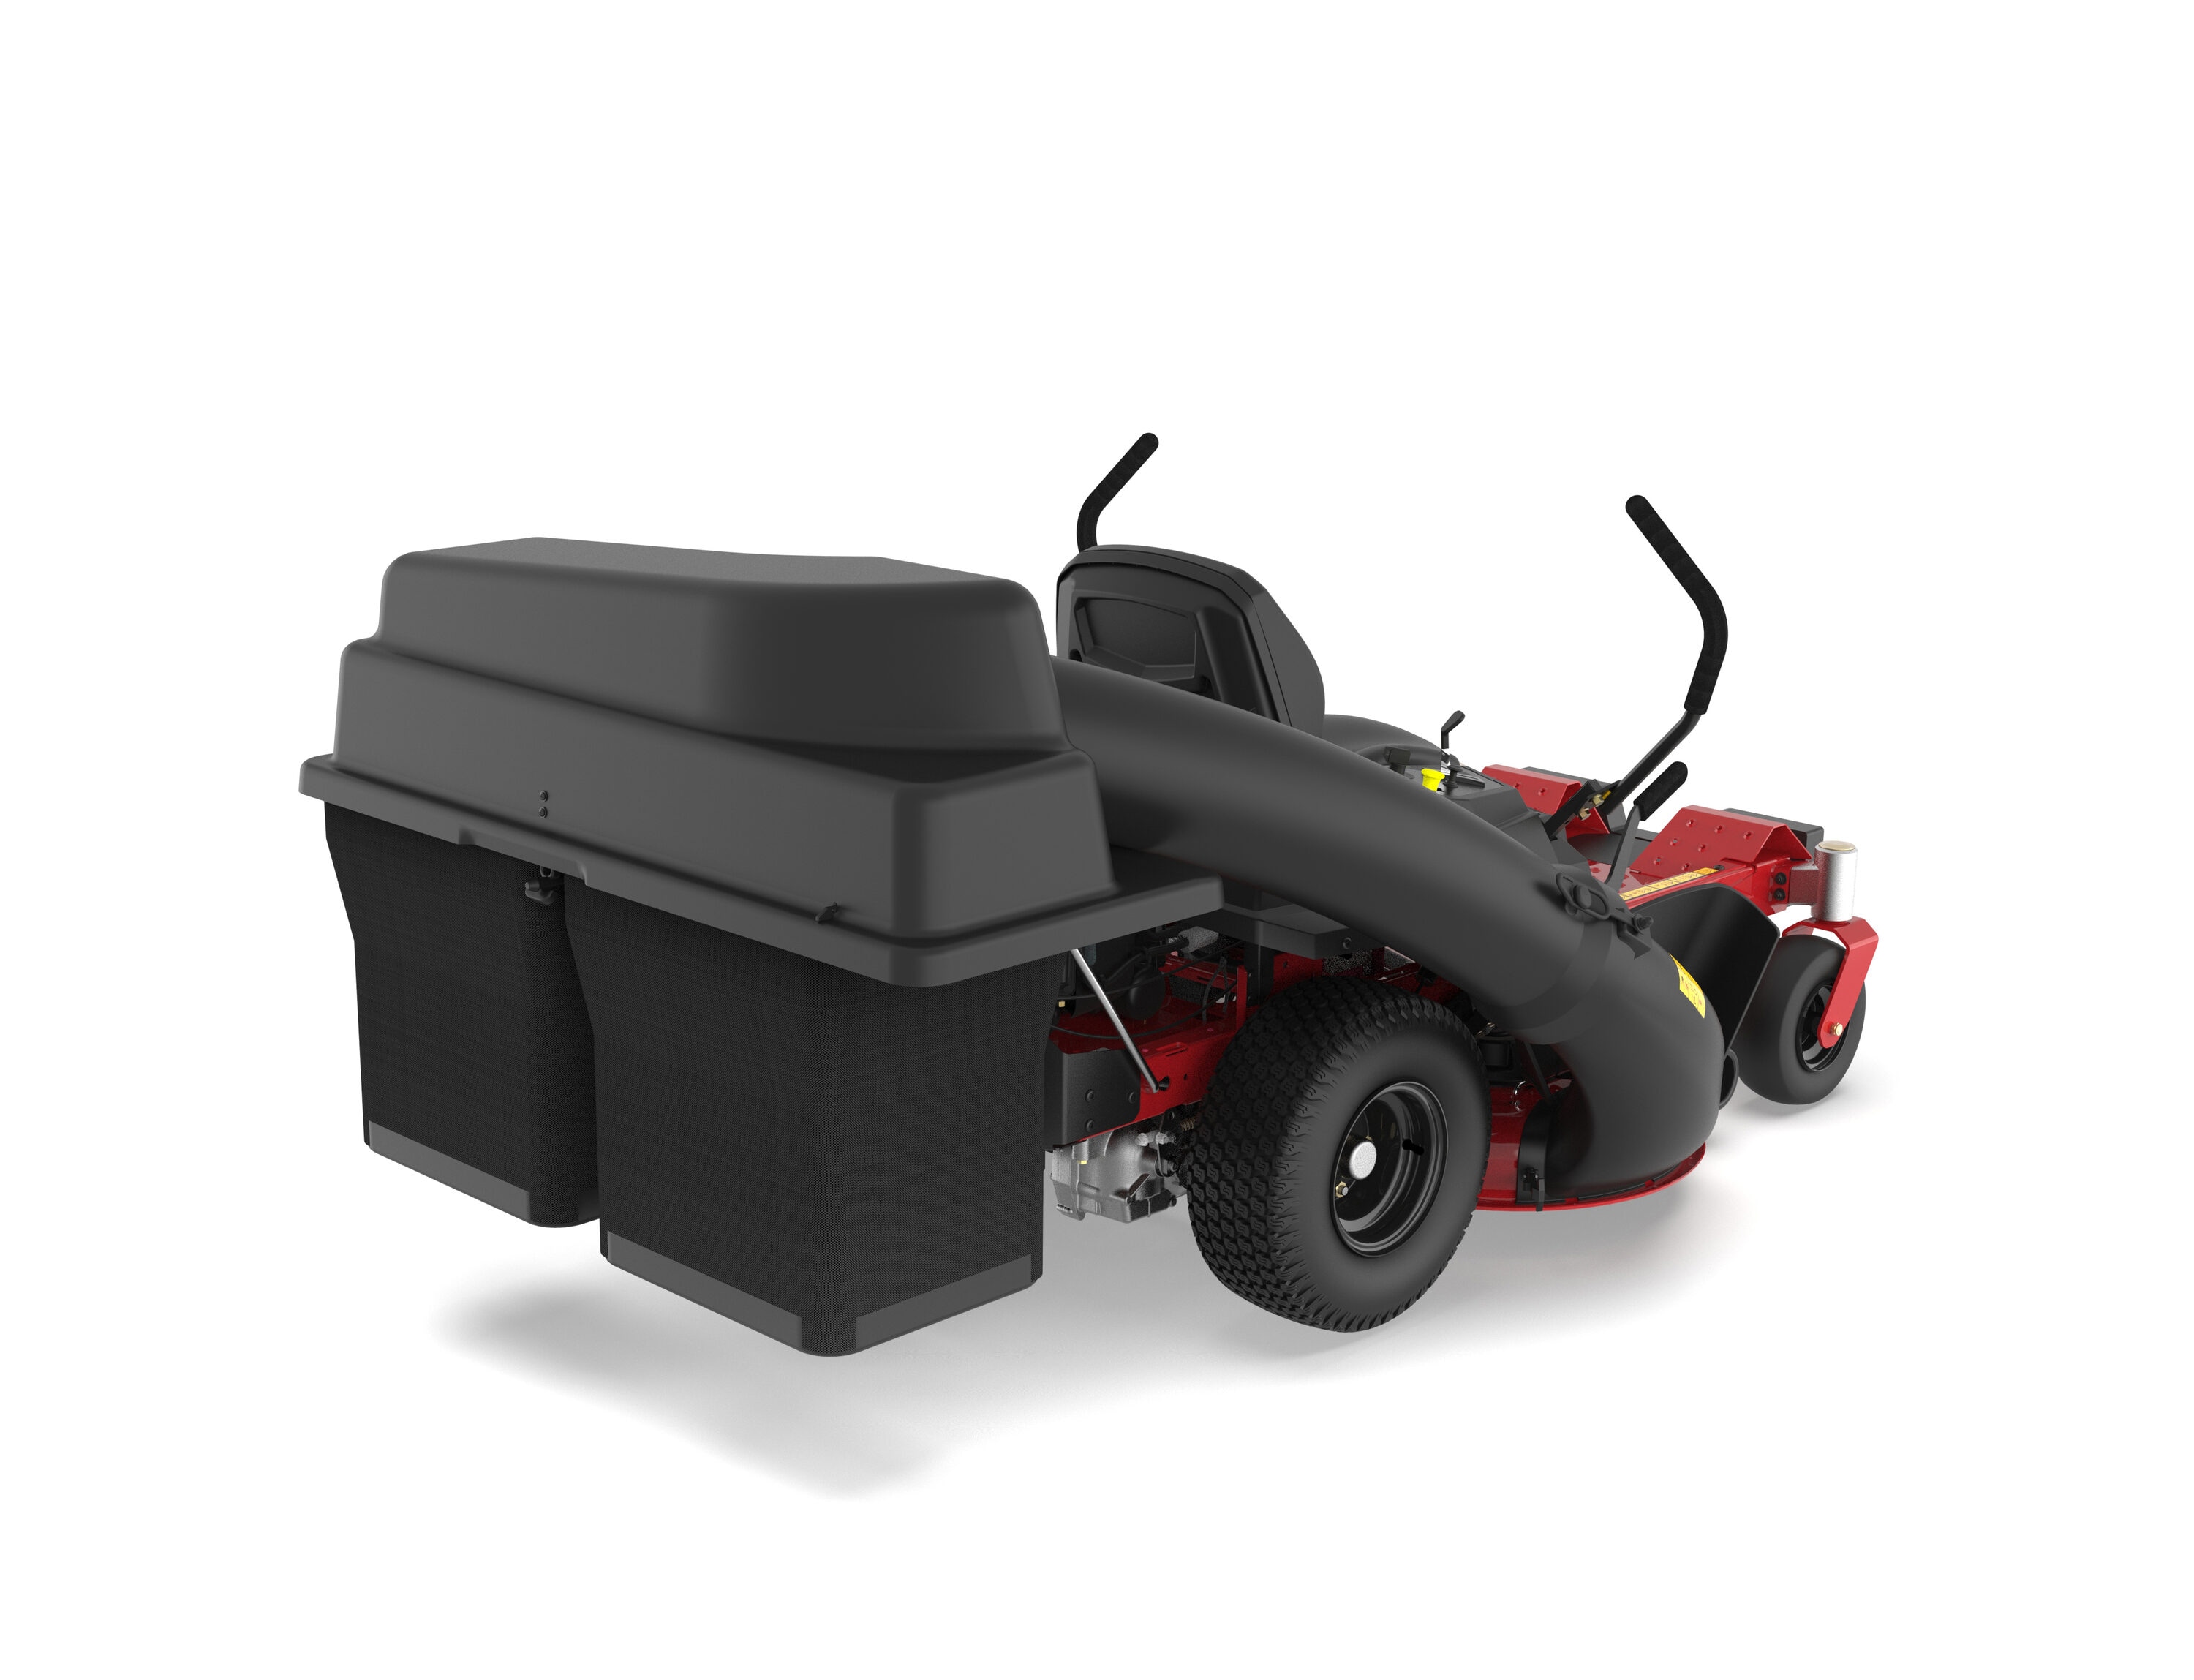 Husqvarna 3 Bagger for Riding Mower (Fits 54-in Deck Size) in the